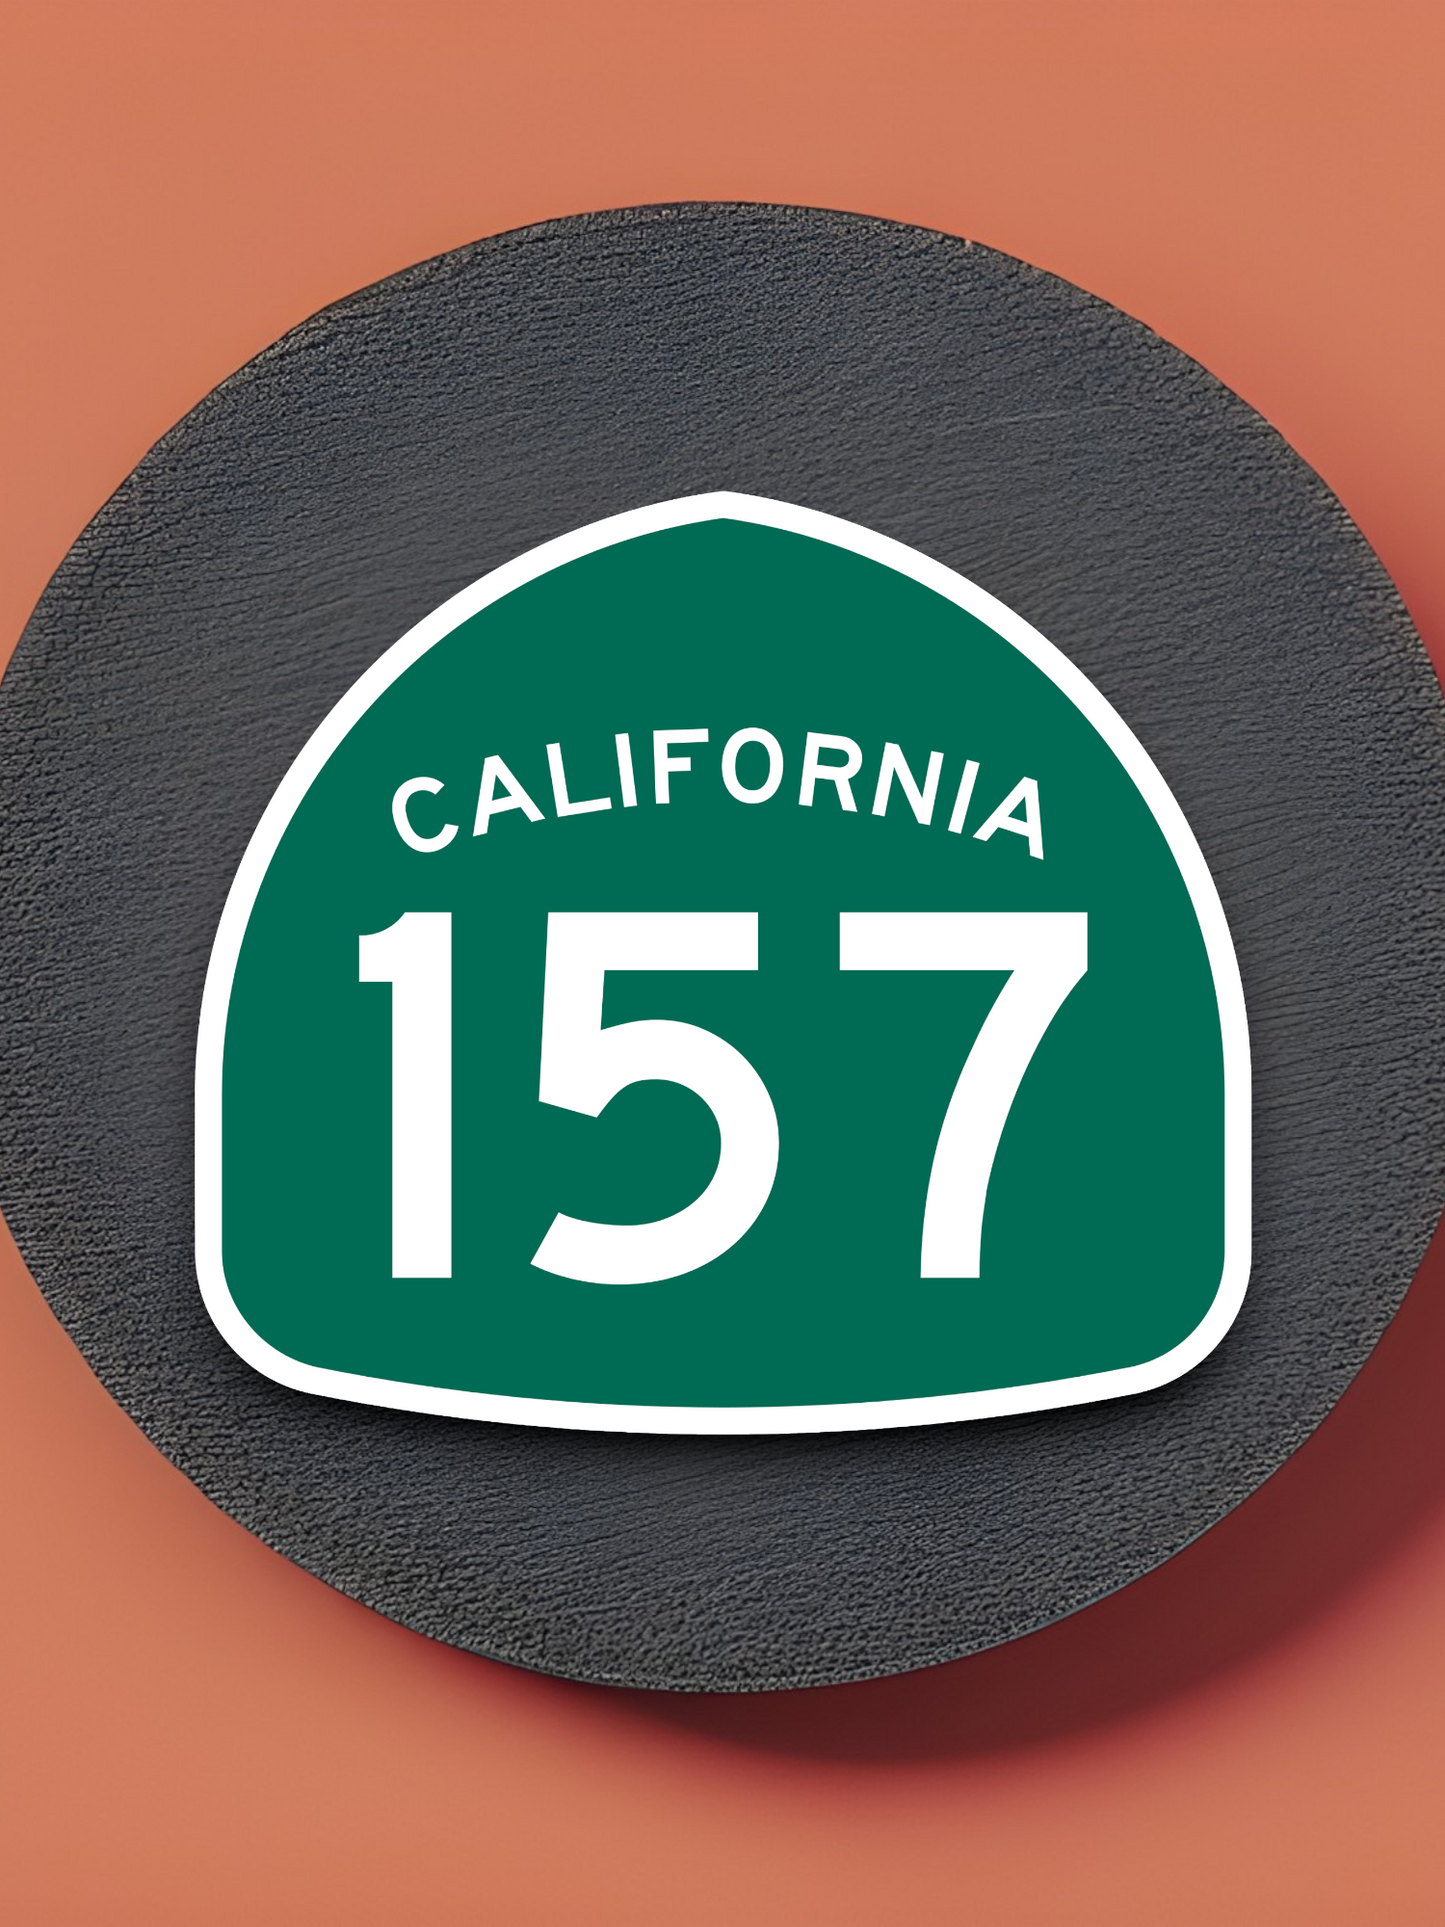 California State Route 157 Road Sign Sticker